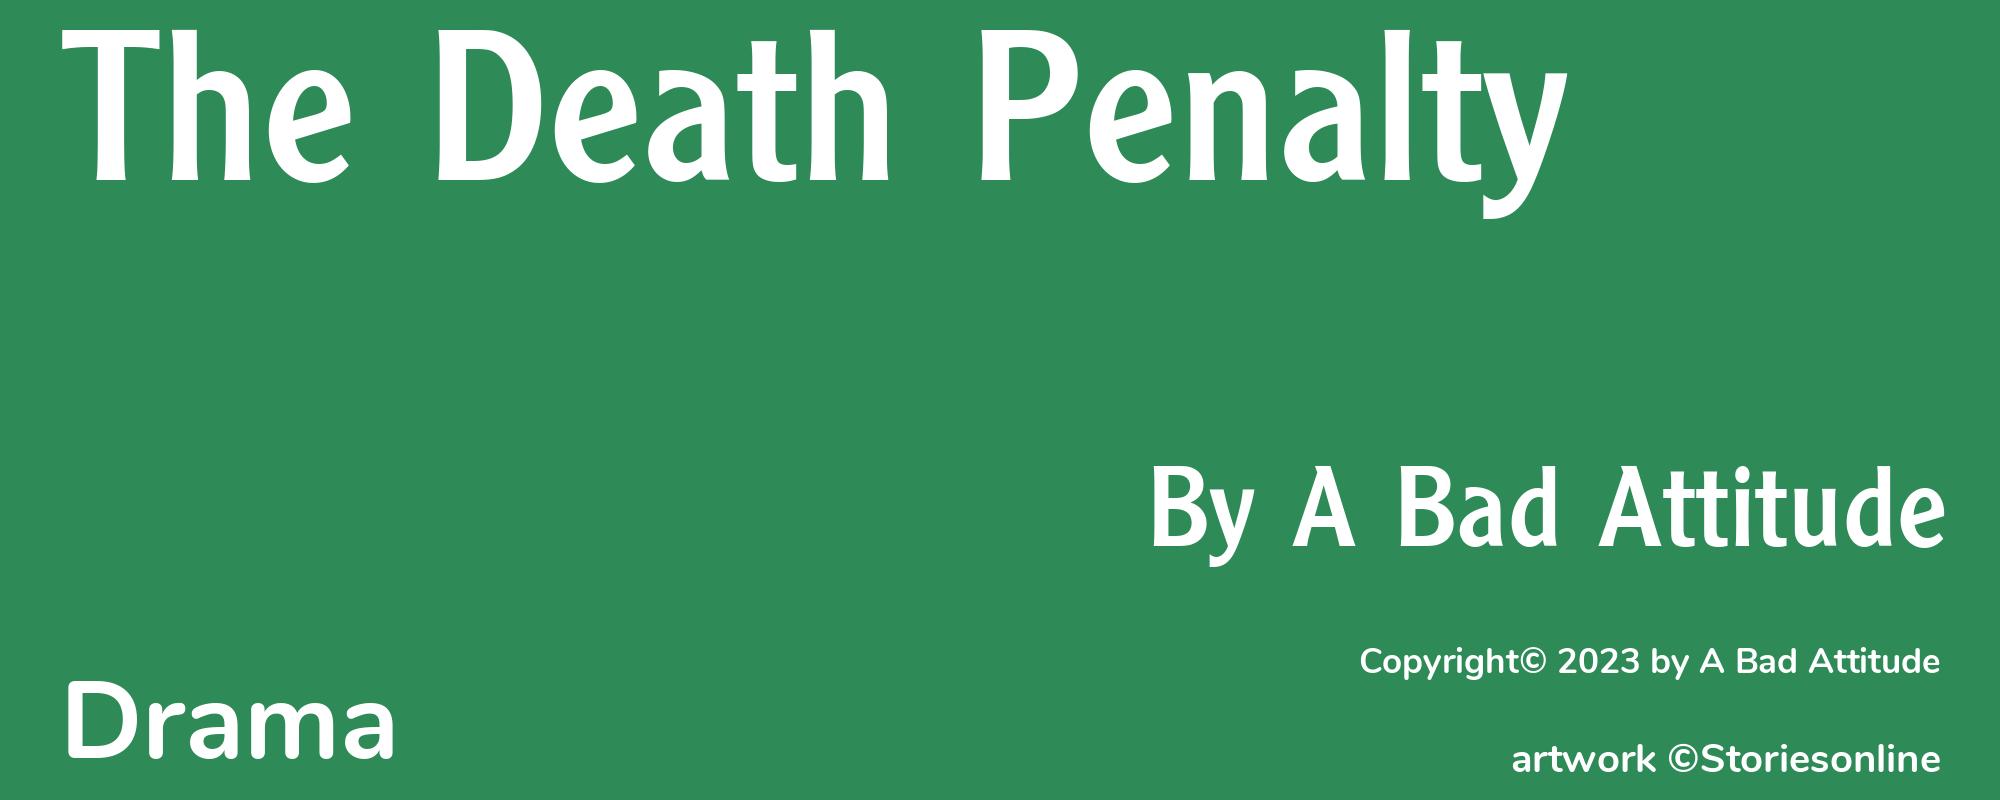 The Death Penalty - Cover